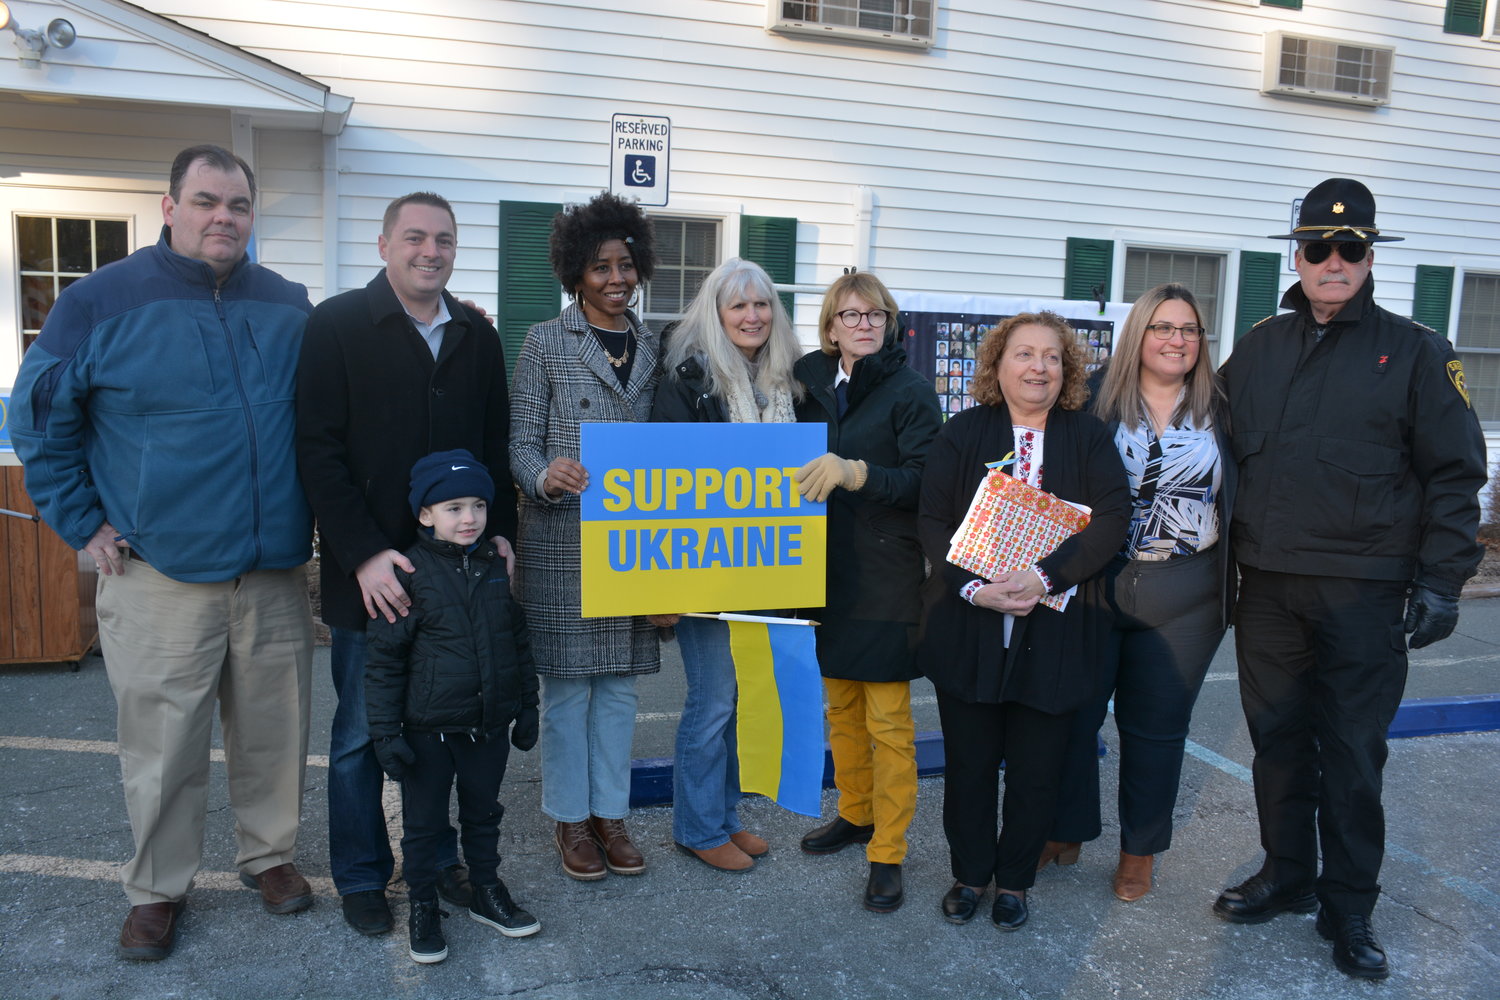 At Friday’s rally, from left, are Legislative Chairman Robert A. Doherty, NYS Senator Mike Martucci (with son Michael Jr.), Human Rights Commissioner Adrienne Jensen, County Treasurer Nancy Buck, NYS Assemblywoman Aileen Gunther, District 2 Legislator Nadia Rajsz, District Attorney Meagan Galligan and Sullivan County Sheriff Mike Schiff.